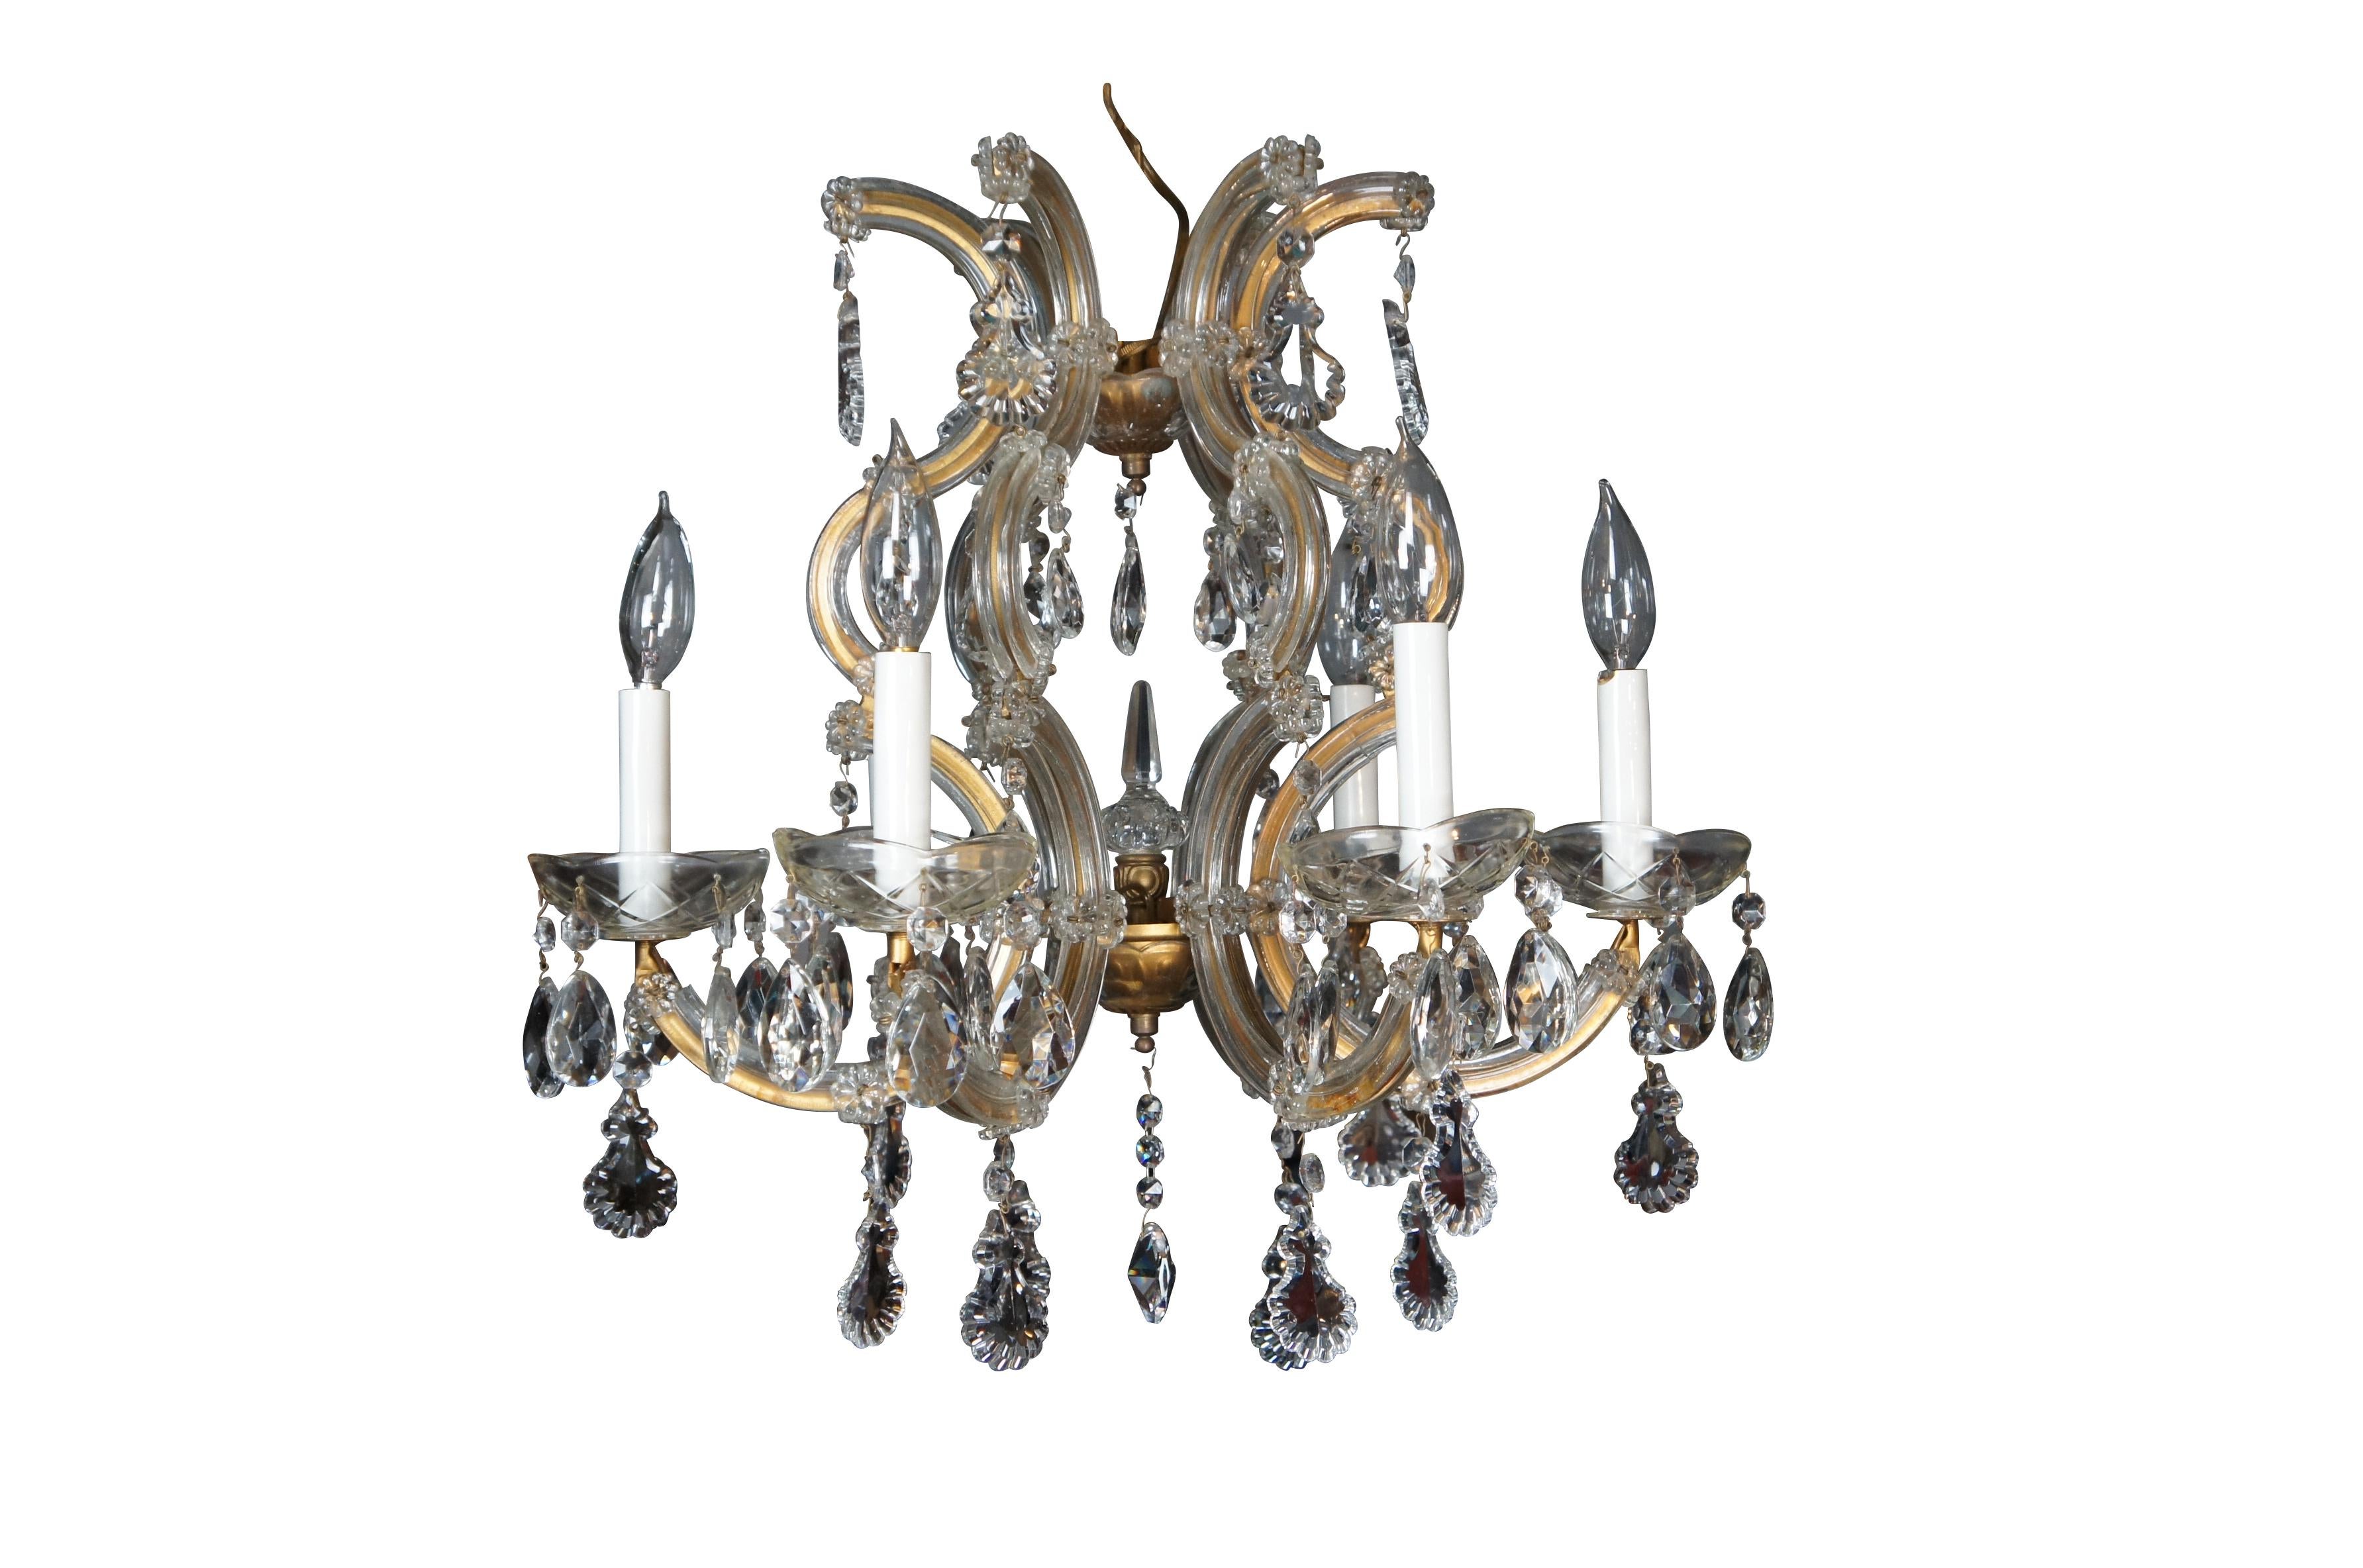 Vintage French Marie Therese glass clad brass drop crystal six arm chandelier featuring serpentine form with candlestick lights.

Maria Theresa chandeliers, which were named after Austria’s Empress Maria Theresa, are antique crystal lighting